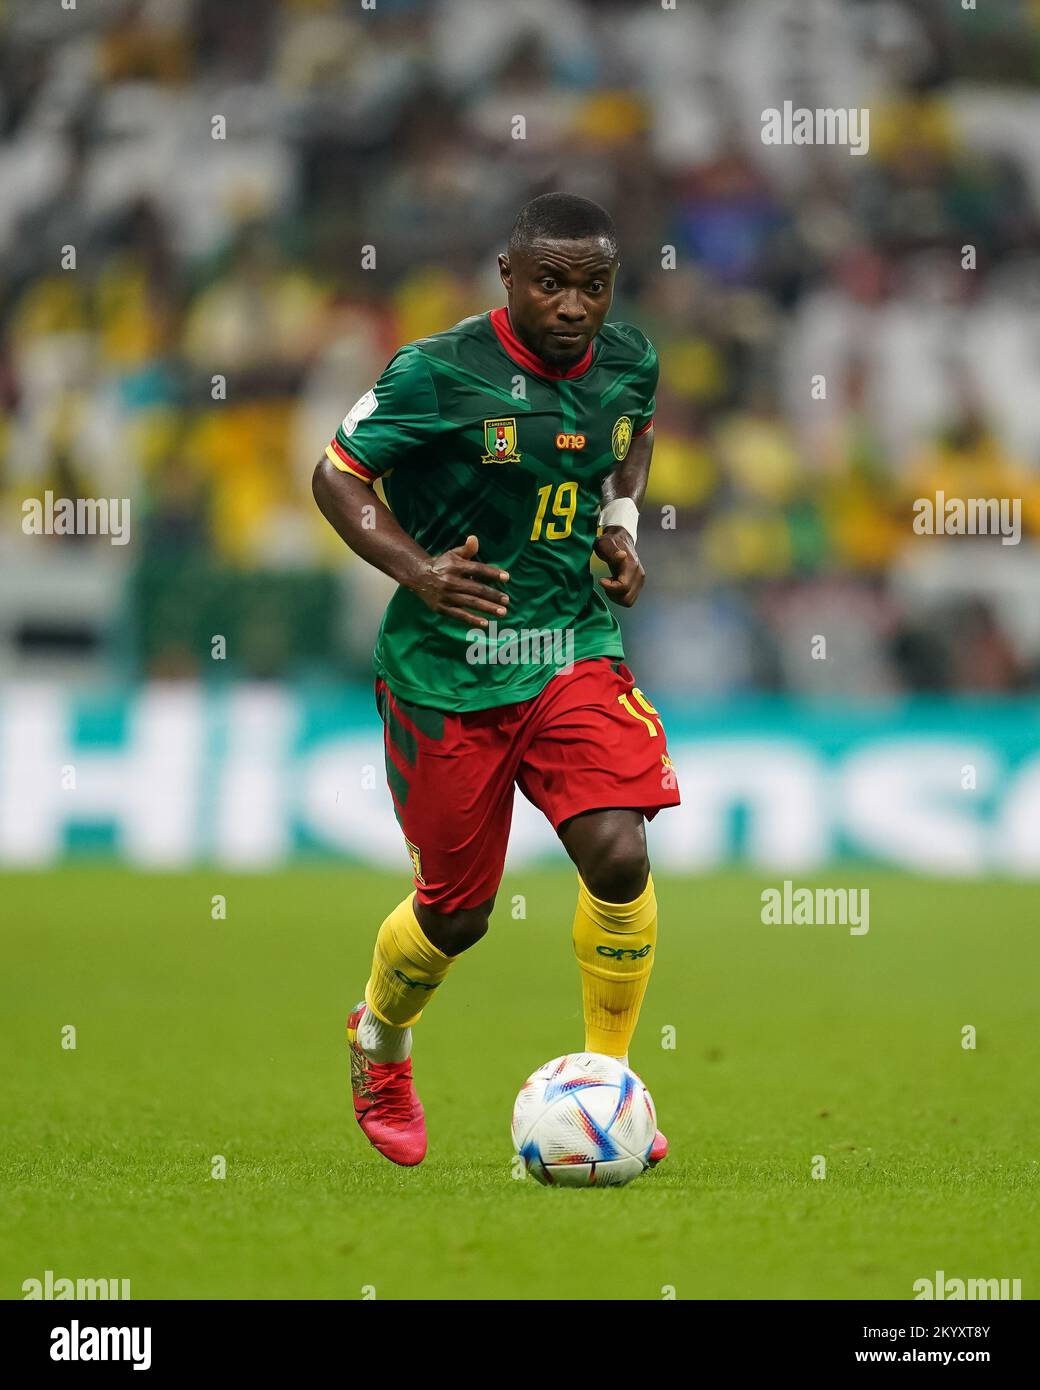 Lusail, Qatar. 02nd Dec, 2022. Lusail Stadium LUSAIL, QATAR - DECEMBER 2: Player of Cameroon Collins Fai drives the ball during the FIFA World Cup Qatar 2022 group G match between Brazil and Cameroon at Lusail Stadium on December 2, 2022 in Lusail, Qatar. (Photo by Florencia Tan Jun/PxImages) (Florencia Tan Jun/SPP) Credit: SPP Sport Press Photo. /Alamy Live News Stock Photo